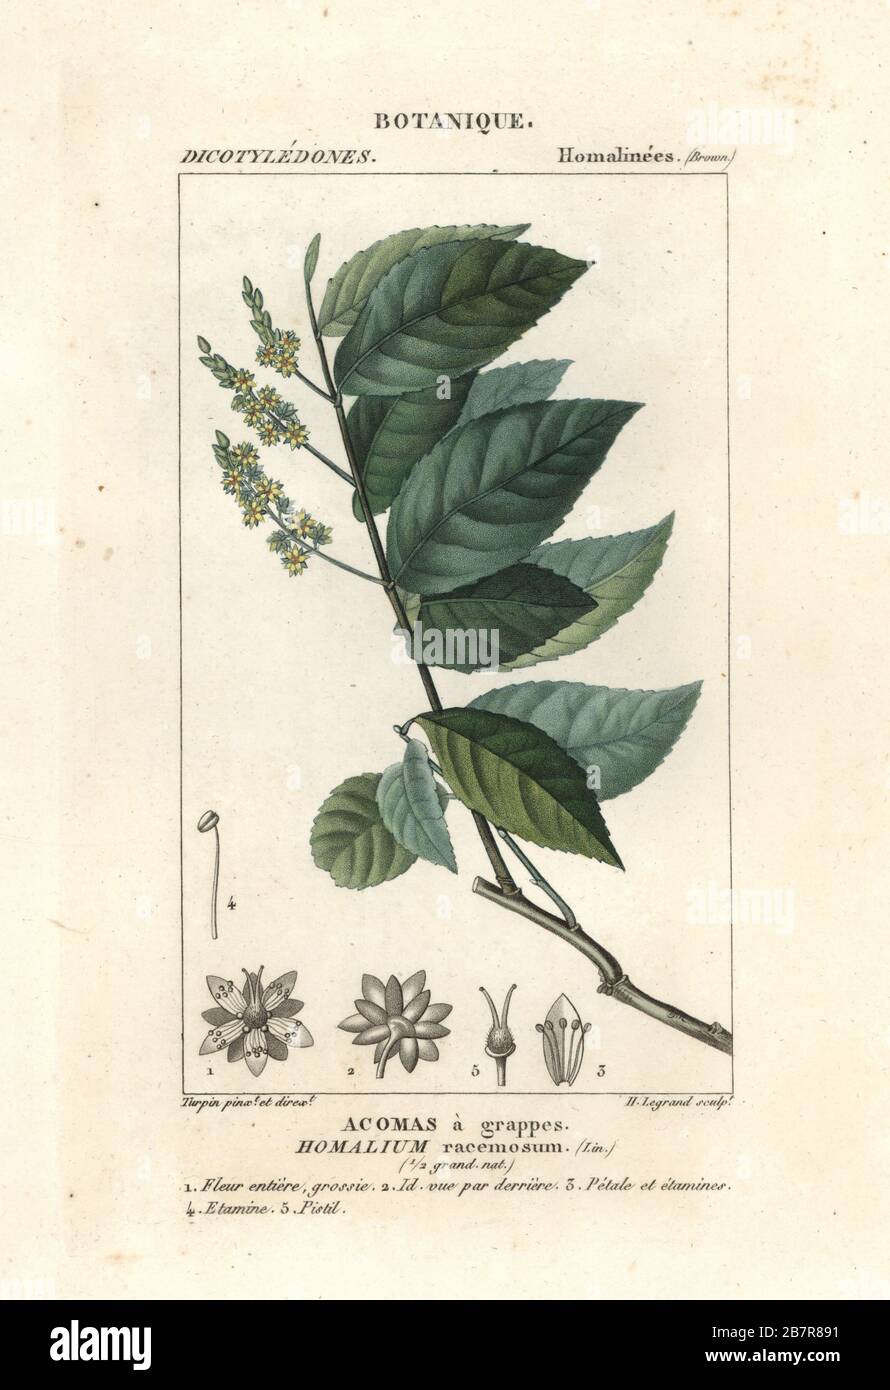 Ironwood, Homalium racemosum, Acomas a grappes. Handcoloured copperplate stipple engraving from Antoine Laurent de Jussieu's Dizionario delle Scienze Naturali, Dictionary of Natural Science, Florence, Italy, 1837. Illustration engraved by H. Legrand, drawn and directed by Pierre Jean-Francois Turpin, and published by Batelli e Figli. Turpin (1775-1840) is considered one of the greatest French botanical illustrators of the 19th century. Stock Photo